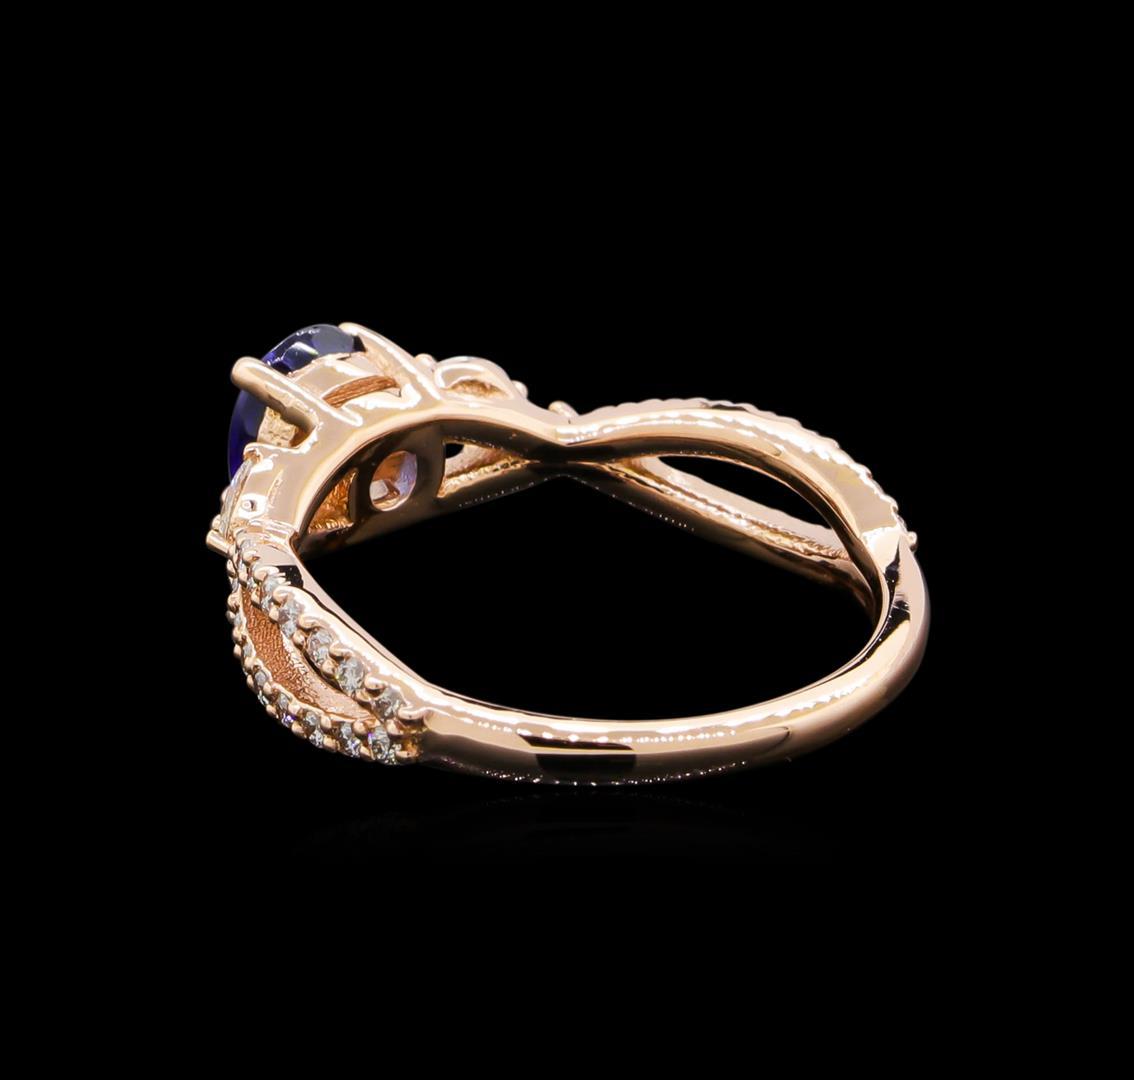 0.71 ctw Sapphire and Diamond Ring - 14KT Rose Gold